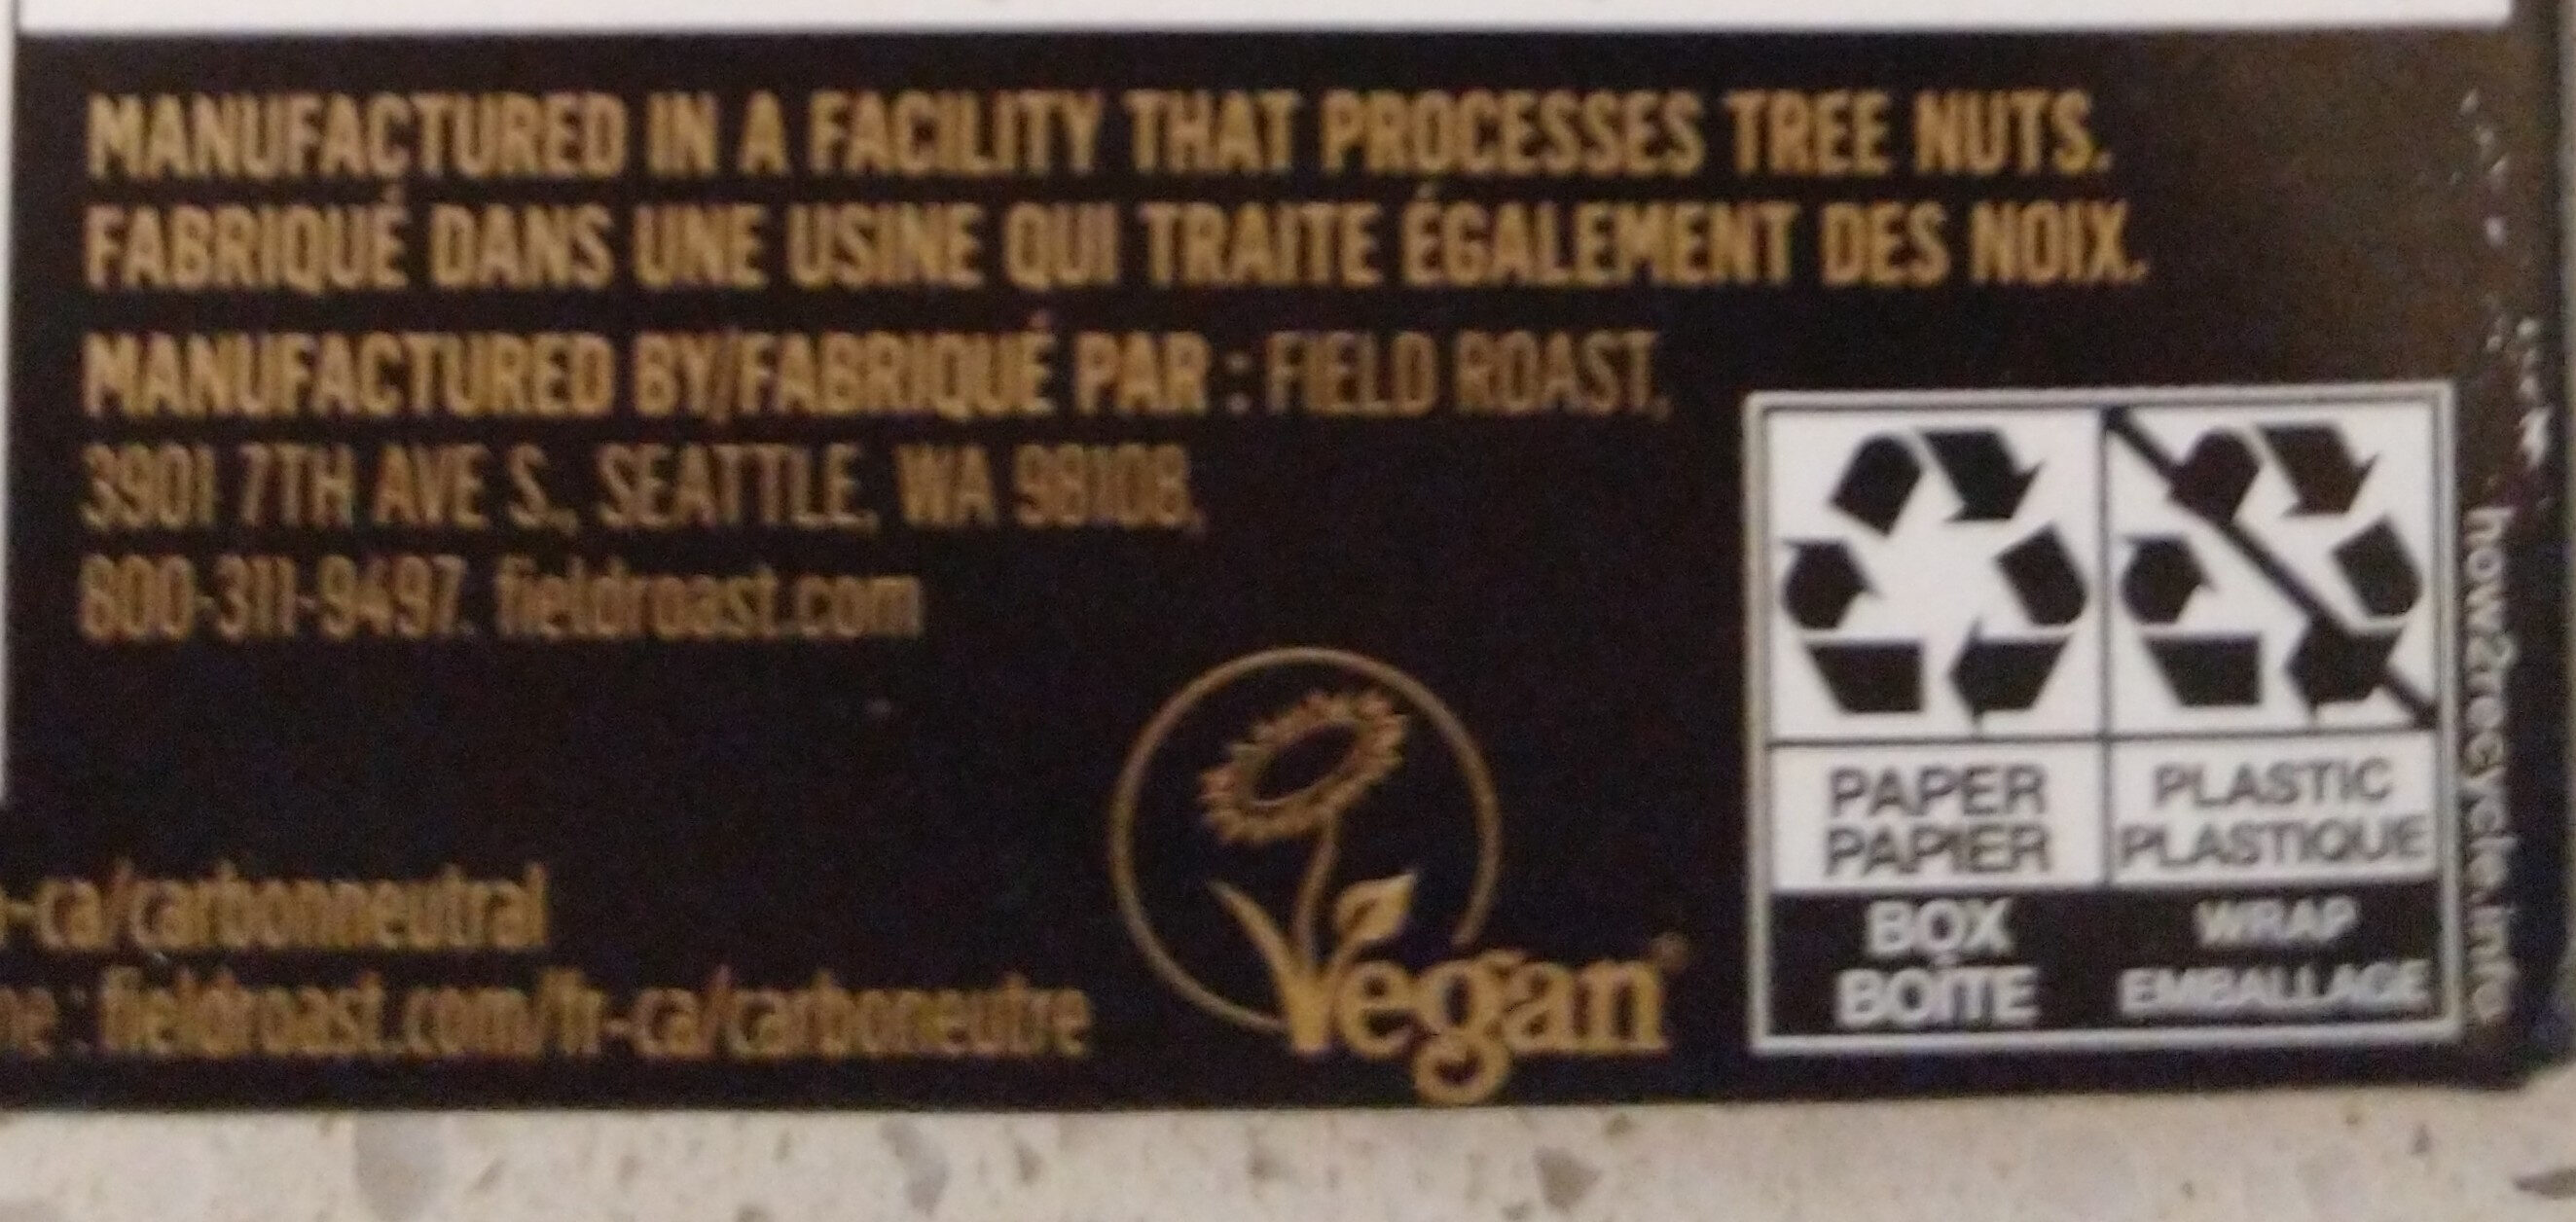 Chef's Signature Plant-based Burgers - Recycling instructions and/or packaging information